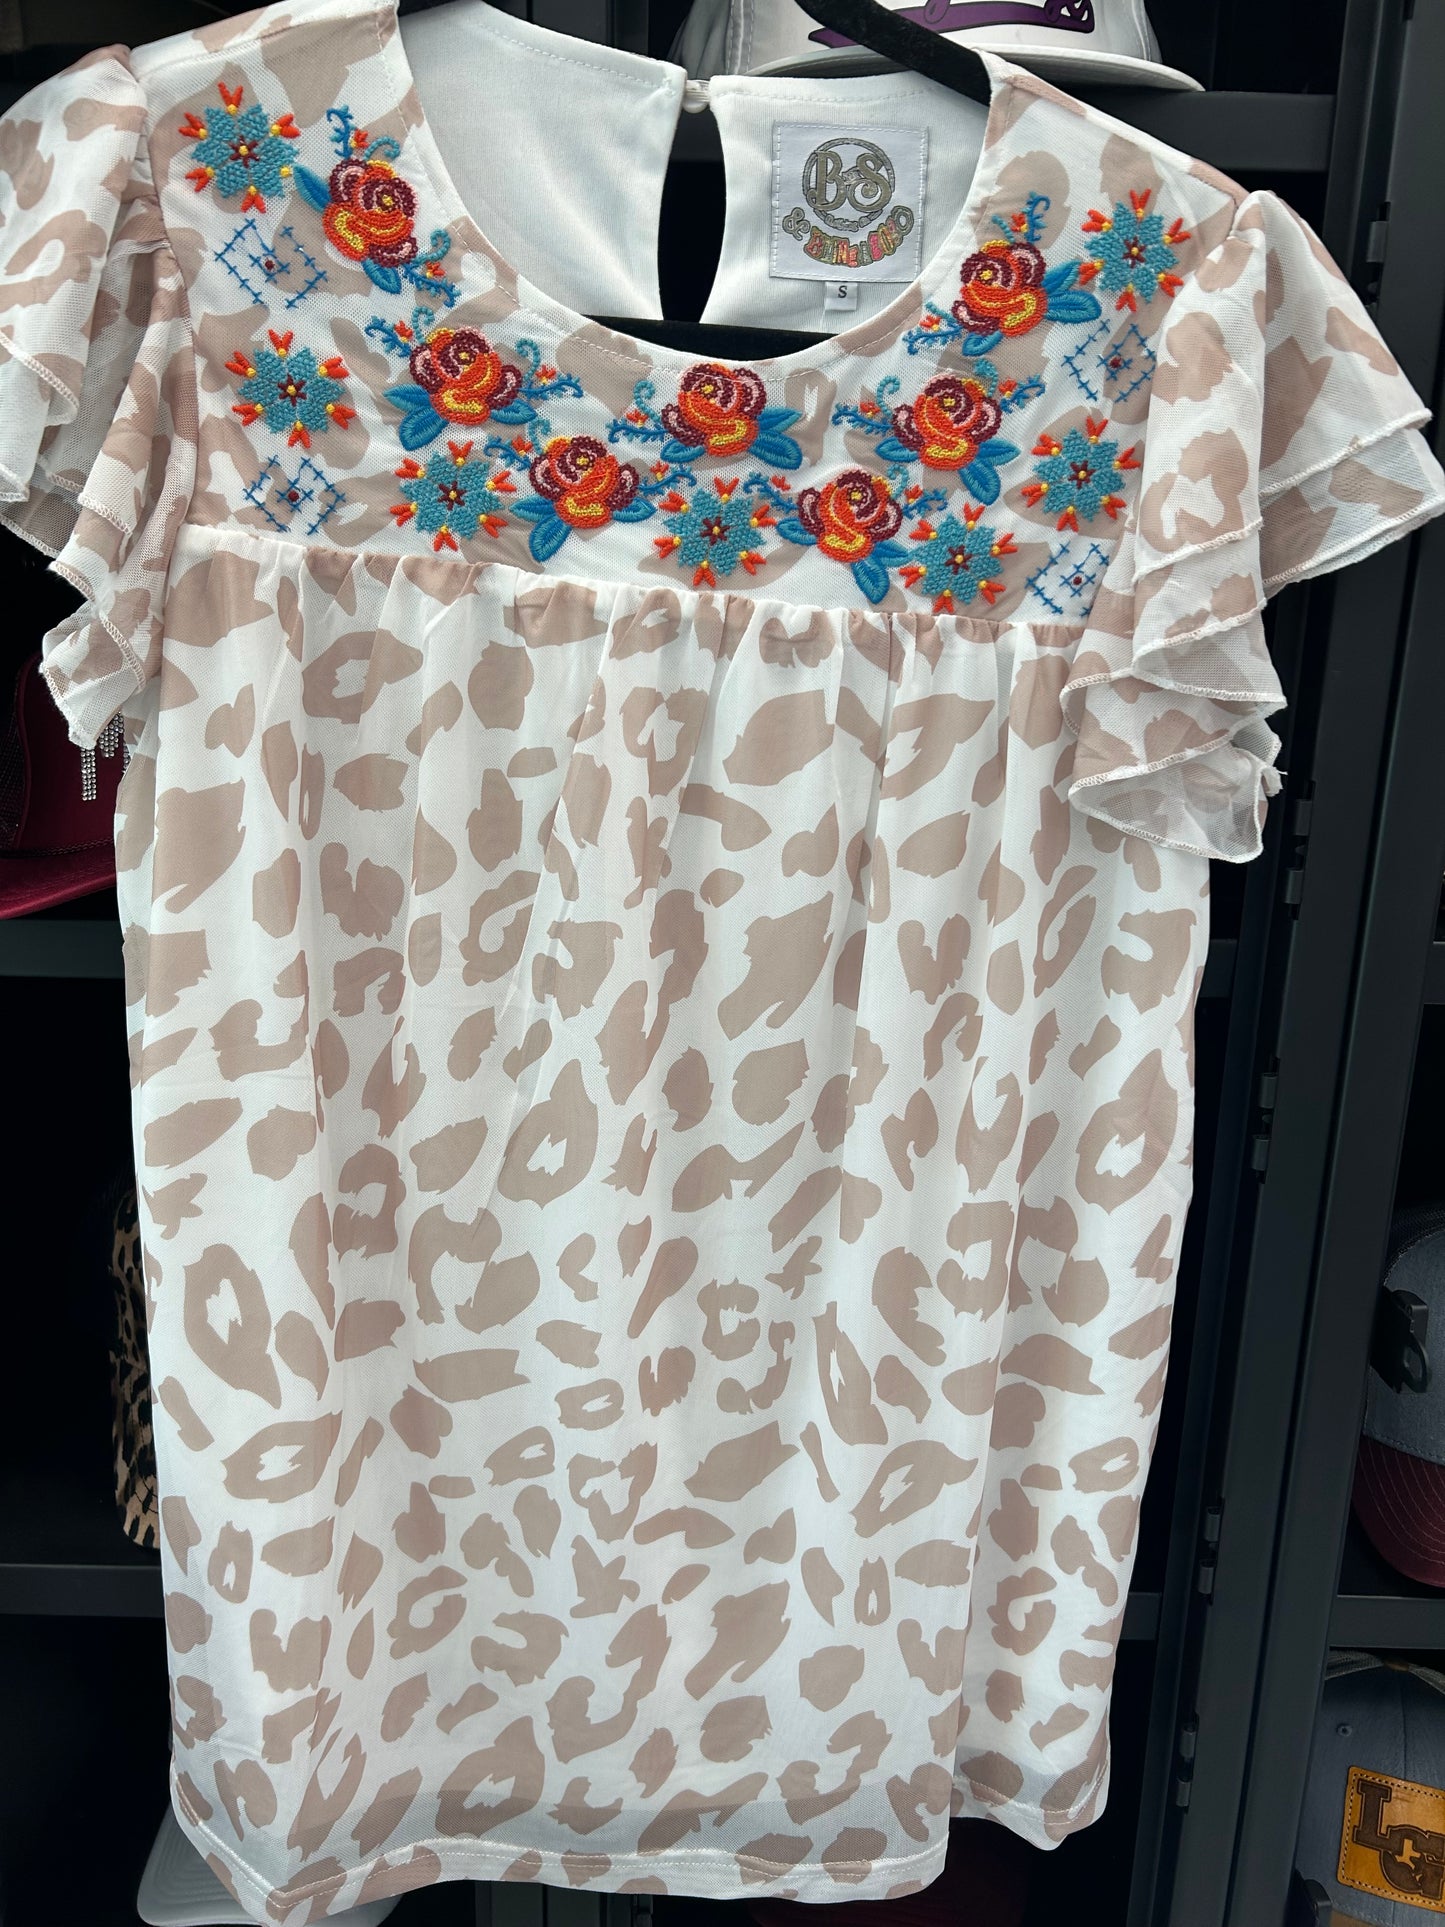 Snow Leopard Embroidered Top